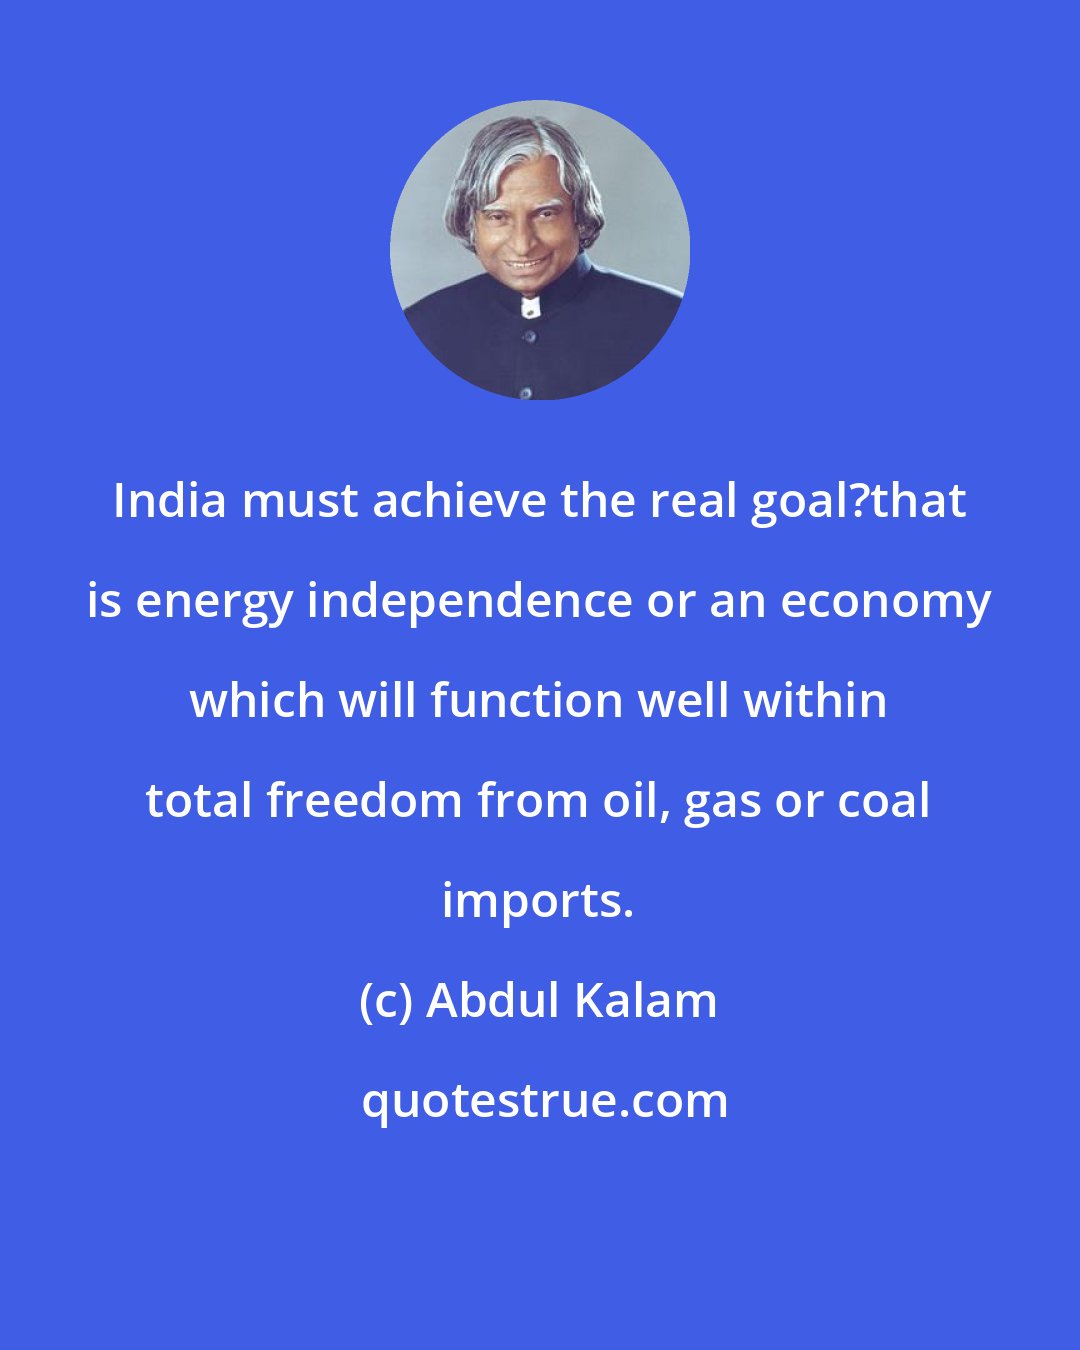 Abdul Kalam: India must achieve the real goal?that is energy independence or an economy which will function well within total freedom from oil, gas or coal imports.